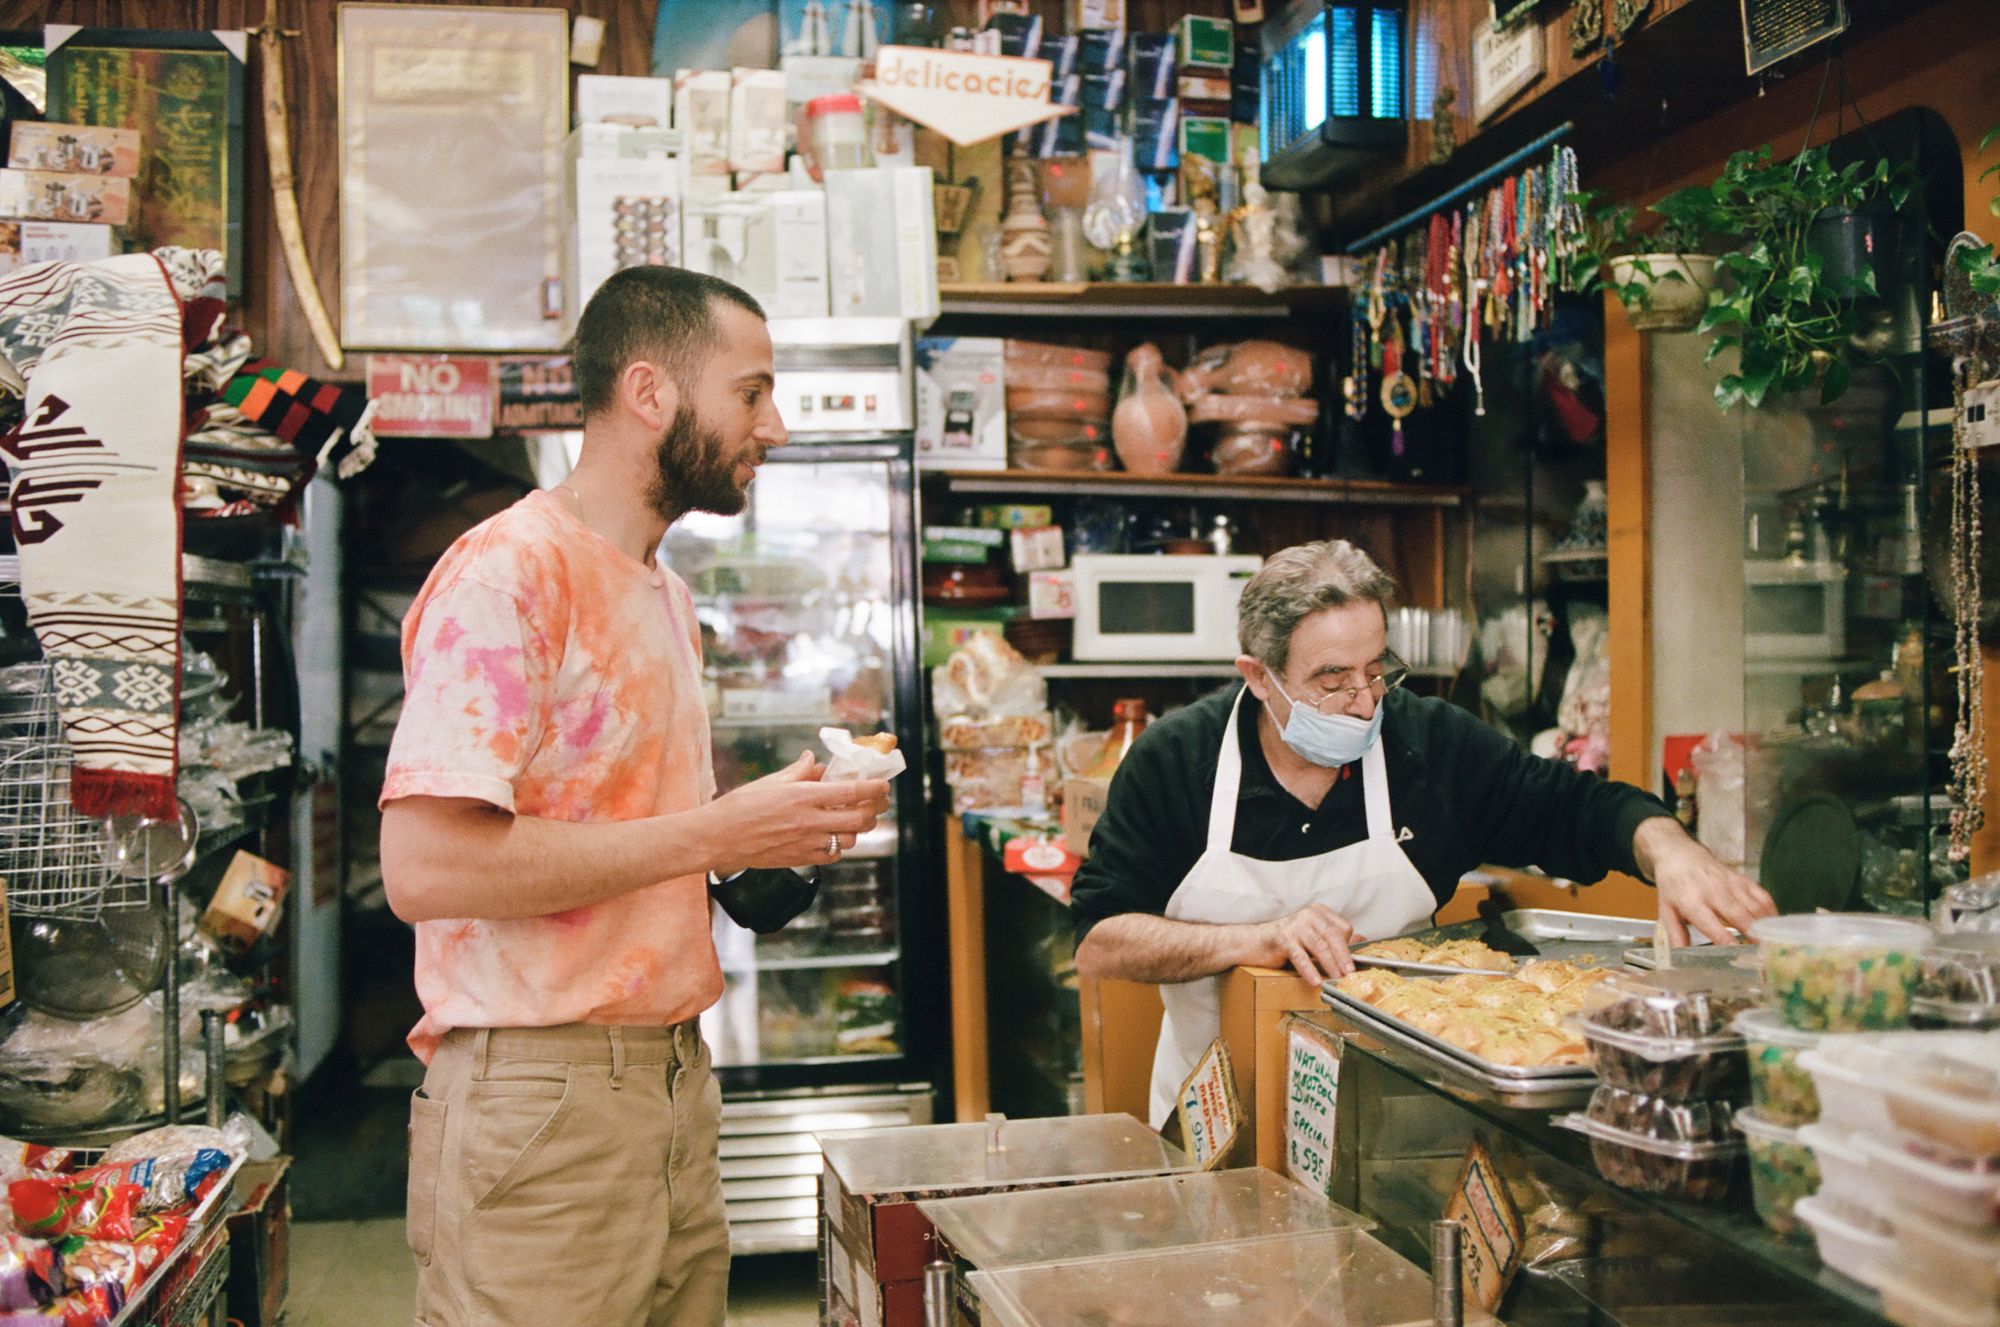 Loren Abramovitch and man in mask confer over pastries.